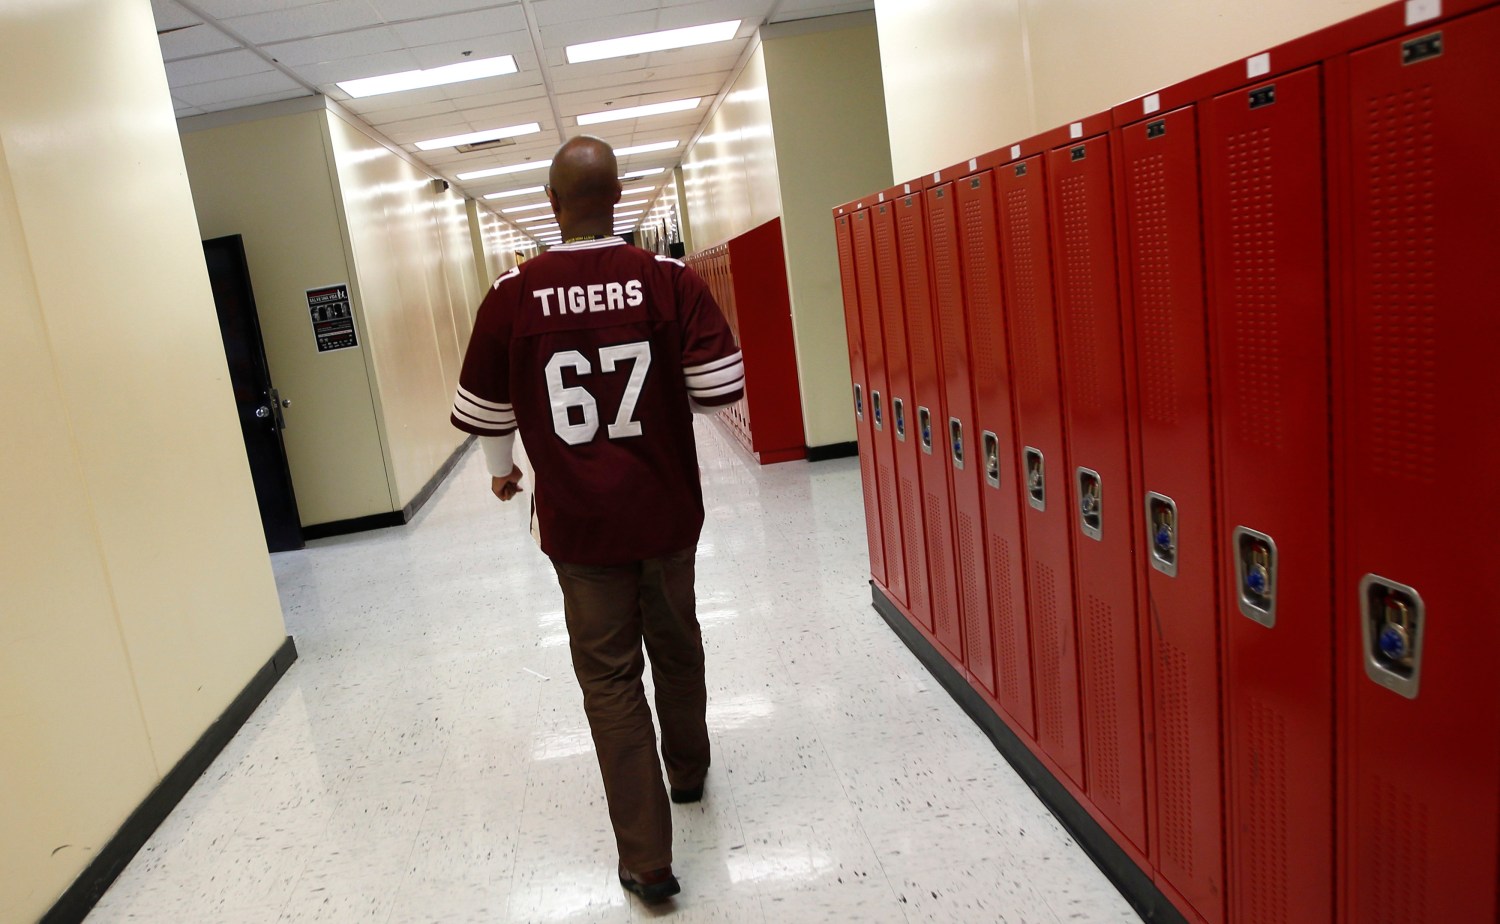 Walter H. Dyett High School principal Charles Campbell tours the school in Chicago, Illinois